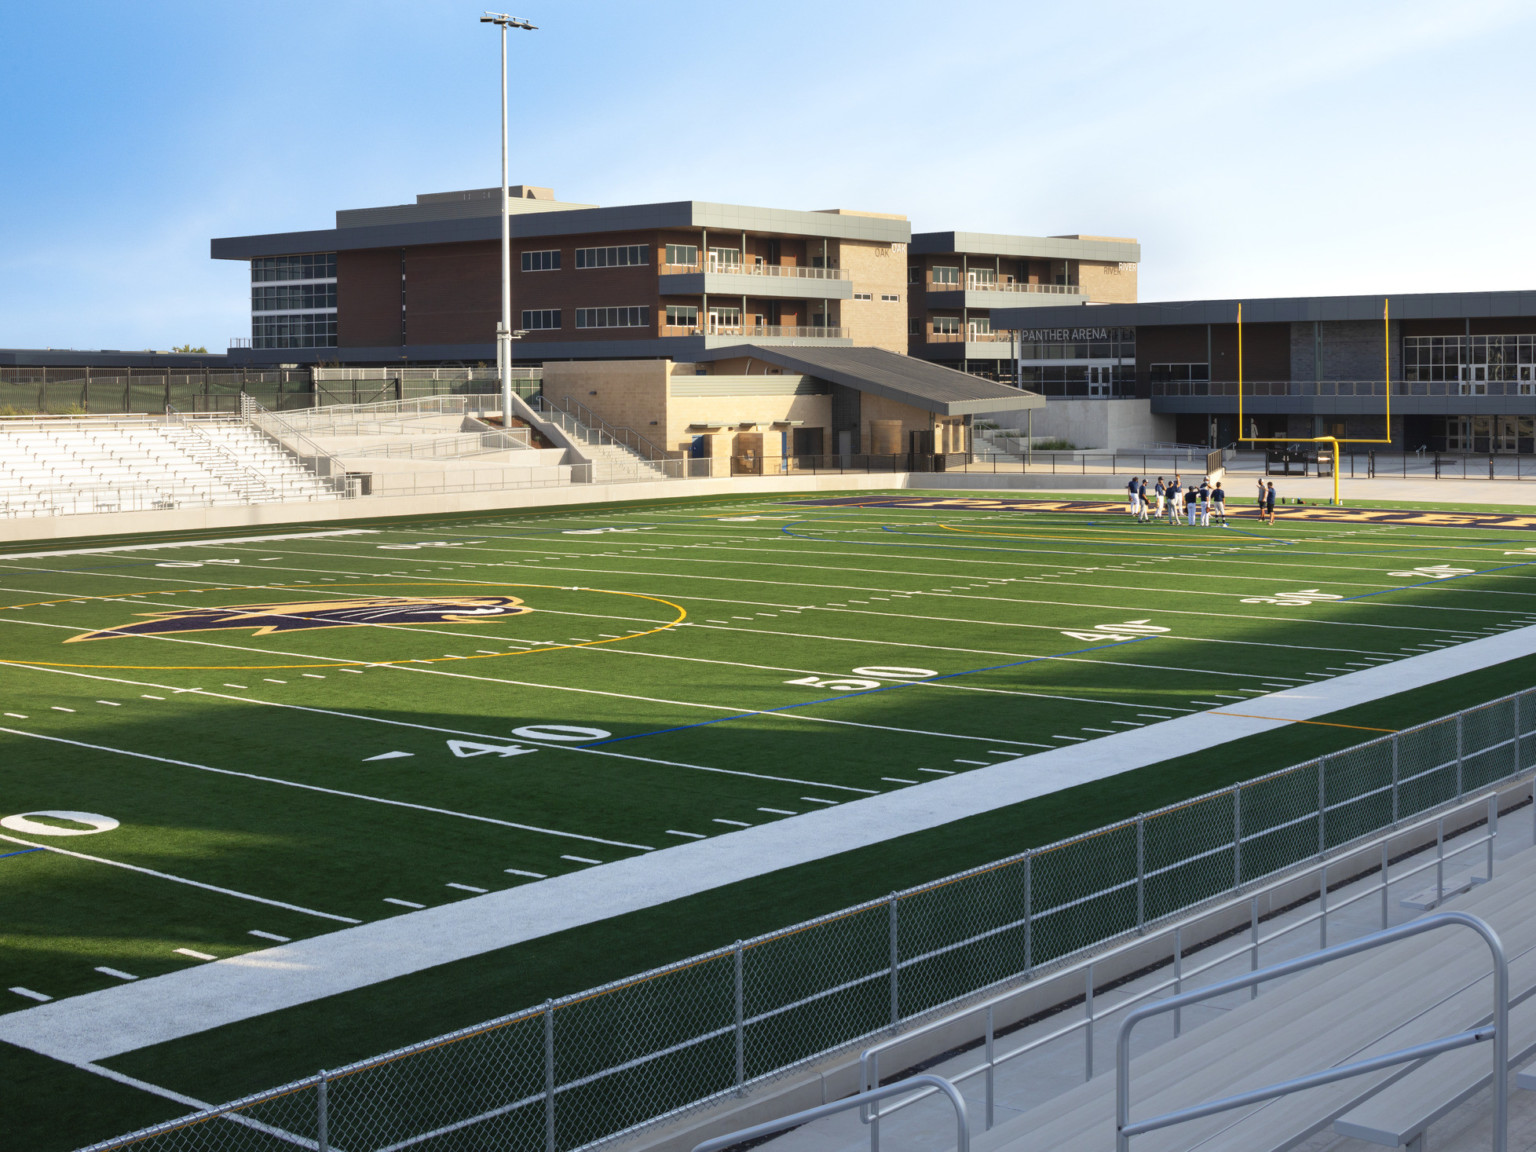 View across football field from sidelines. 2 story building at end zone behind main buildings to left. Metal bleacher benches